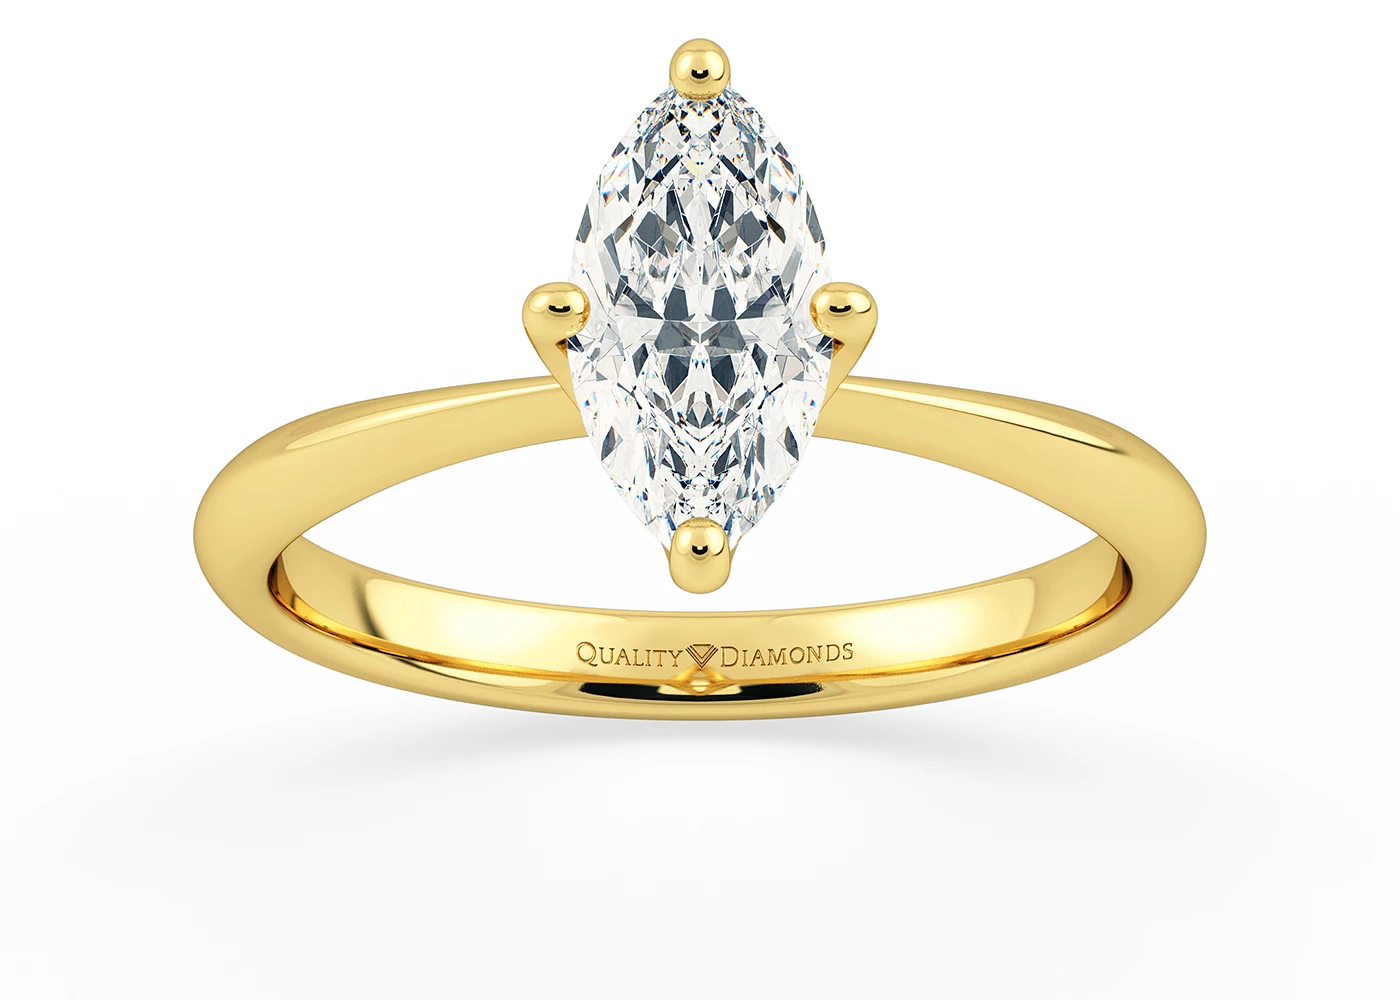 One Carat Marquise Solitaire Diamond Engagement Ring in 18K Yellow Gold